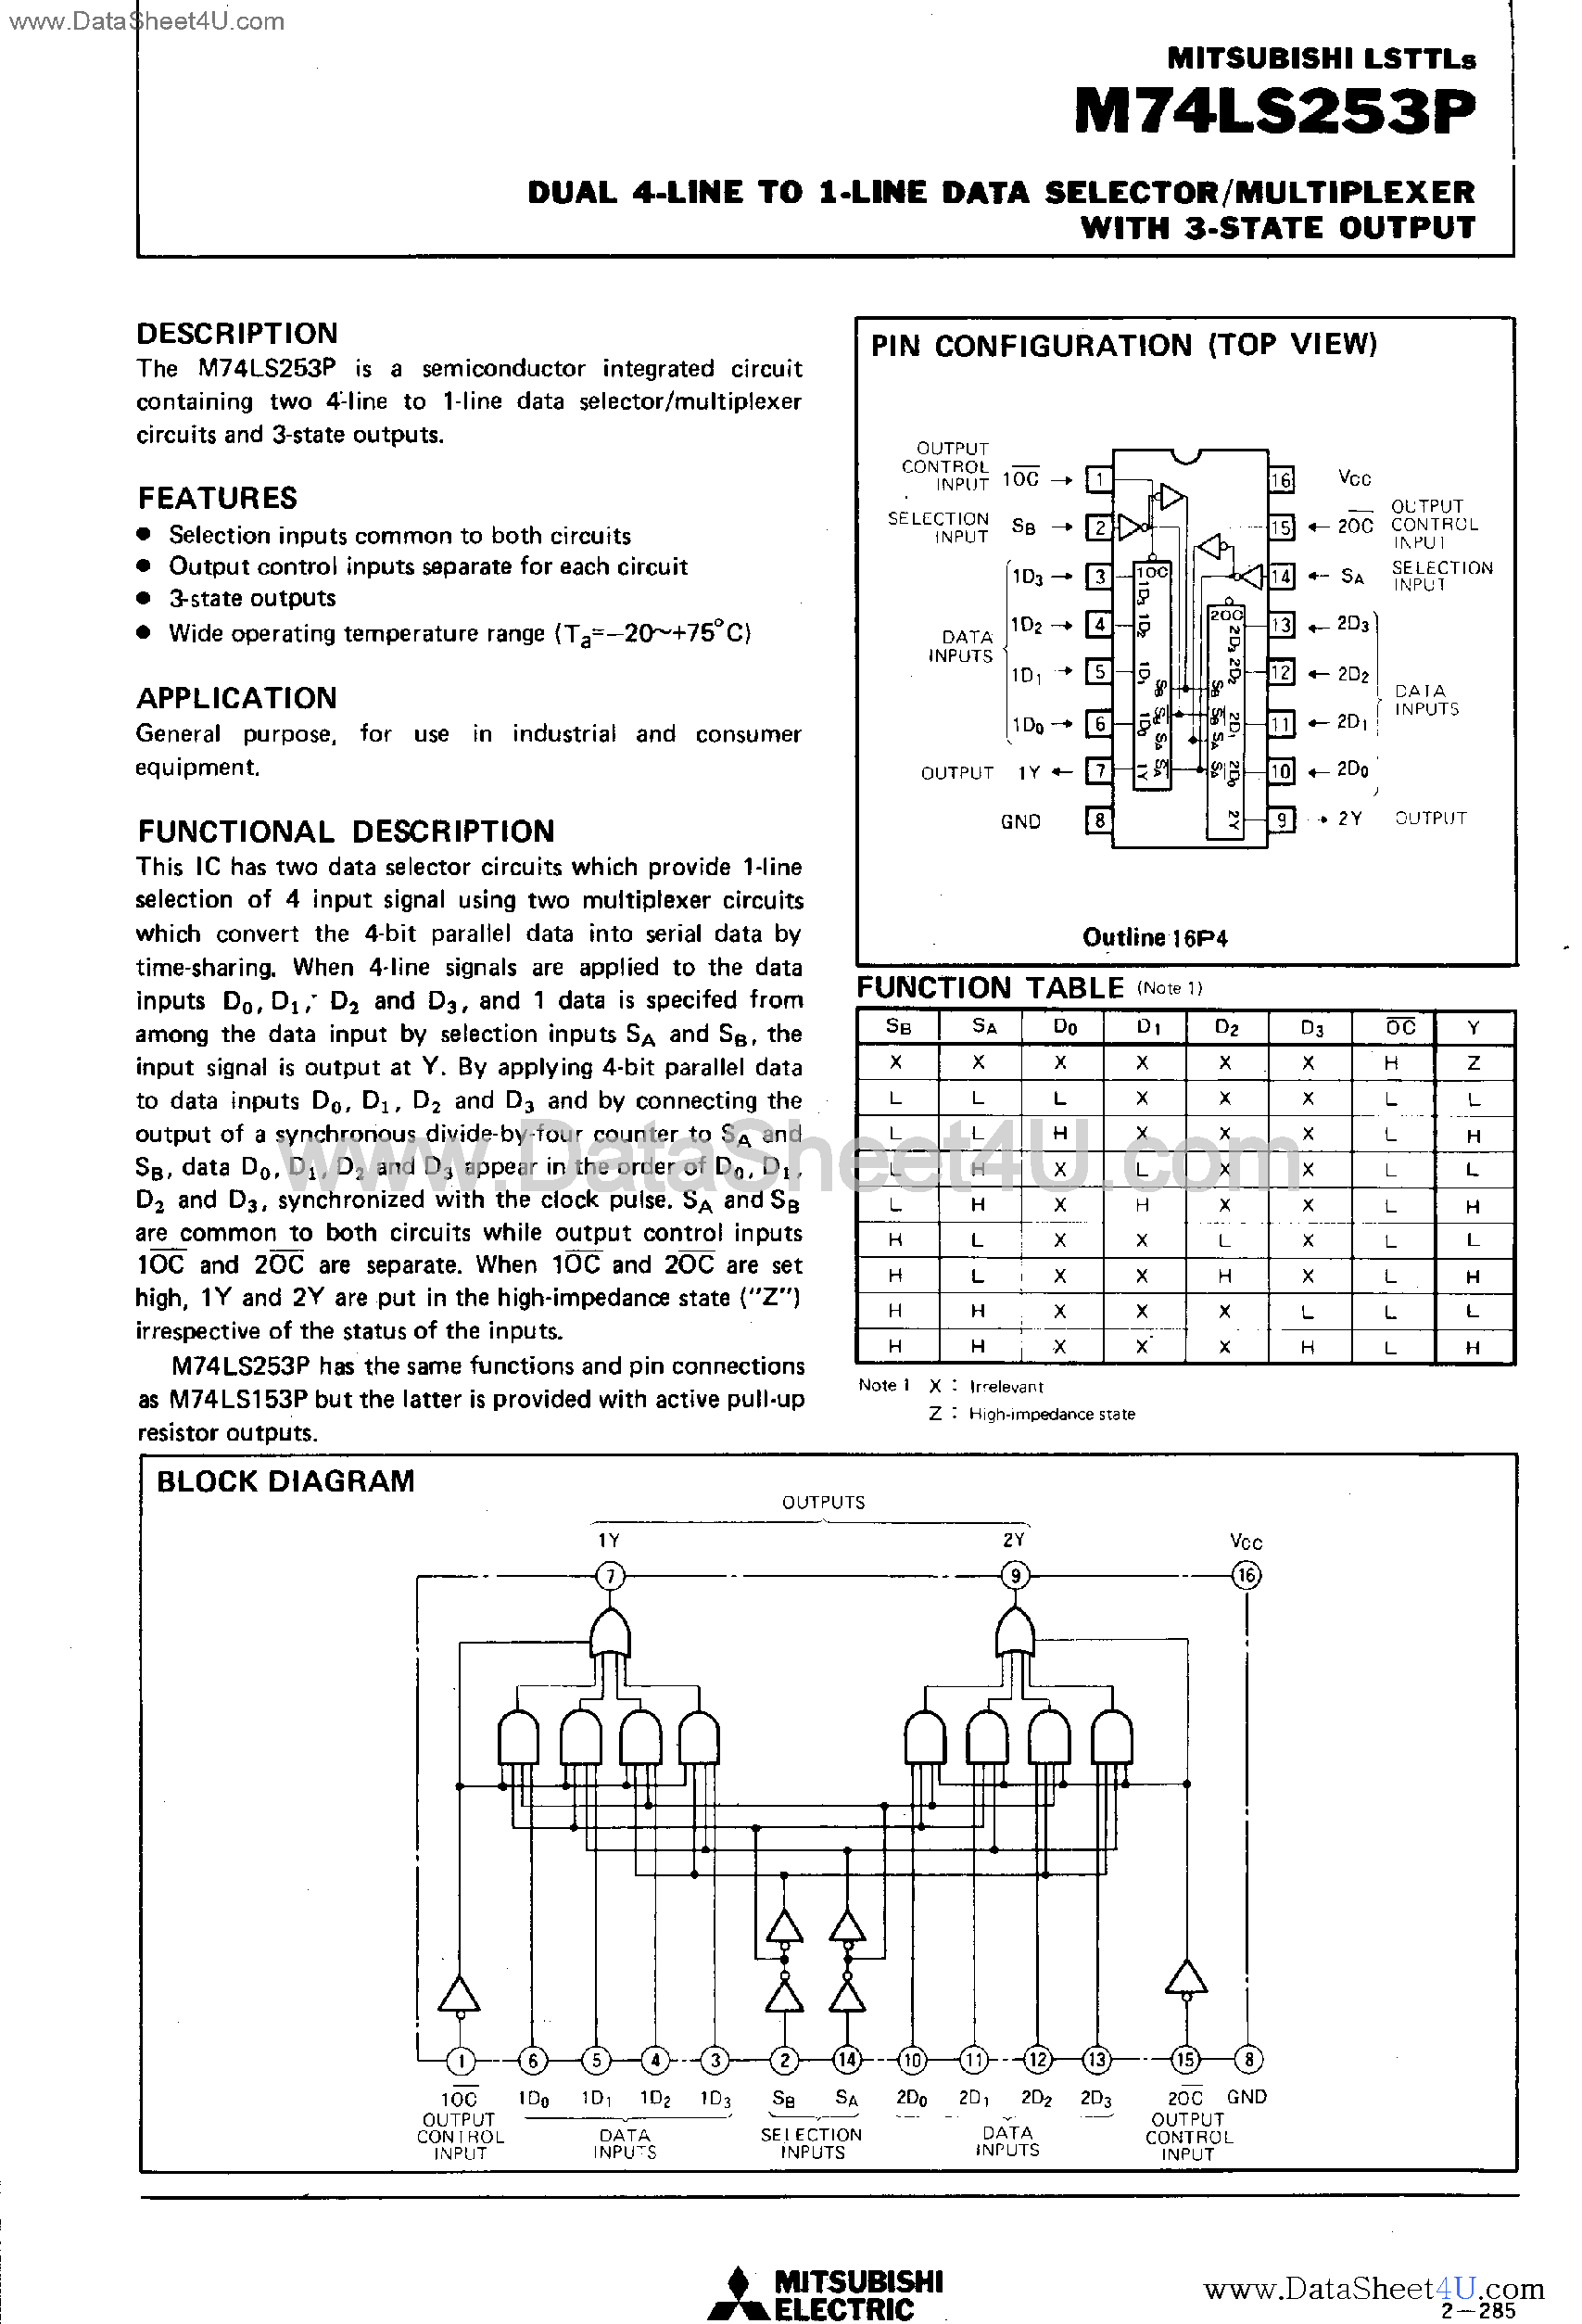 Datasheet M74LS253P - Dual 4-Line to 1-Line Data Selector / Multiplexer page 1